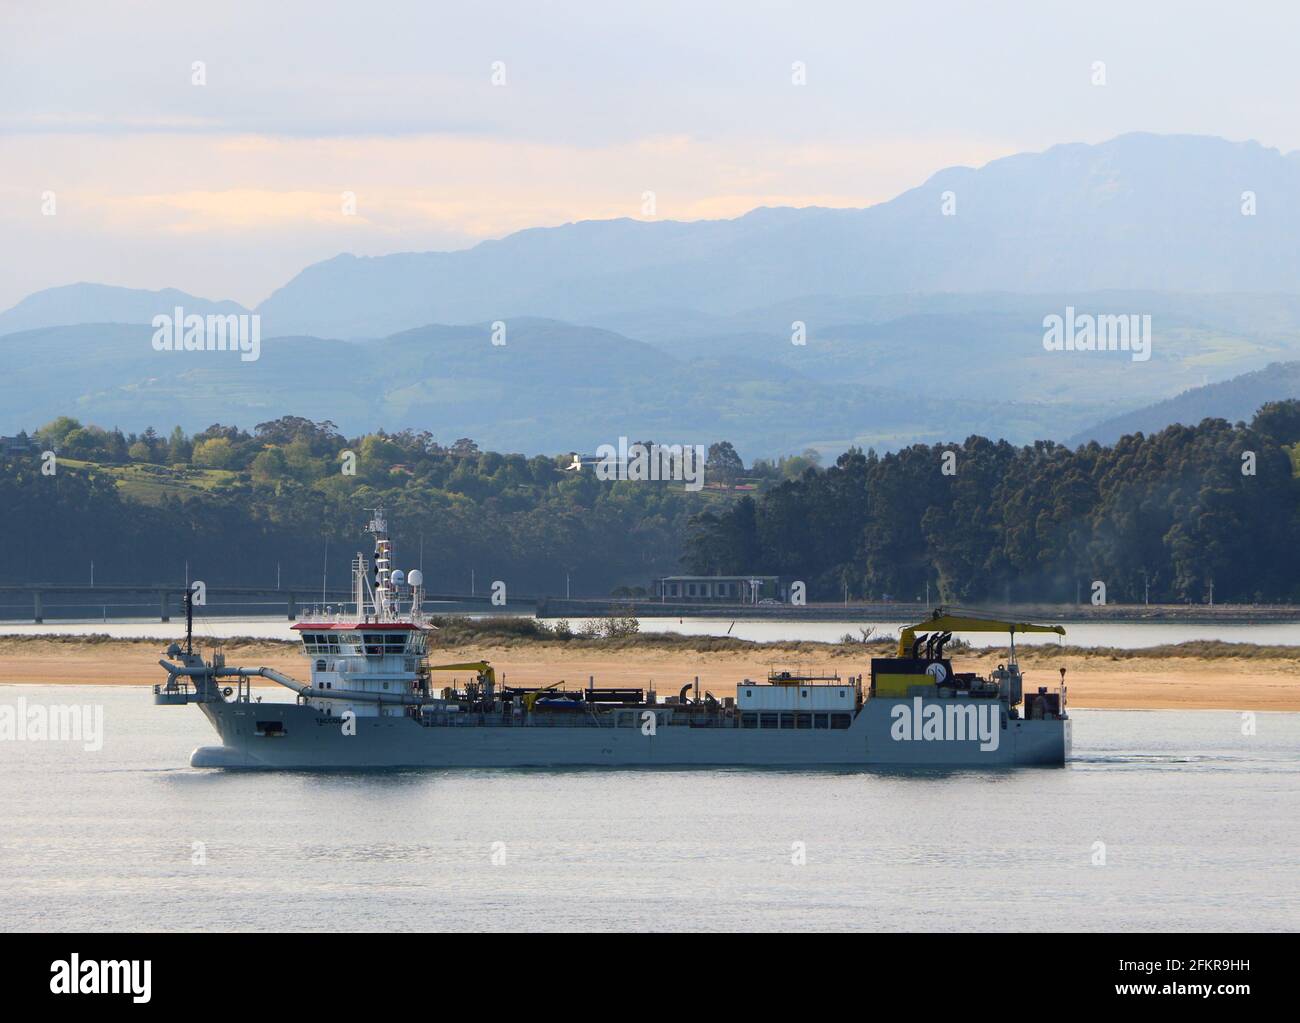 The Taccola hopper dredger working to move sand in the bay of Santander Cantabria Spain on a calm spring morning Stock Photo